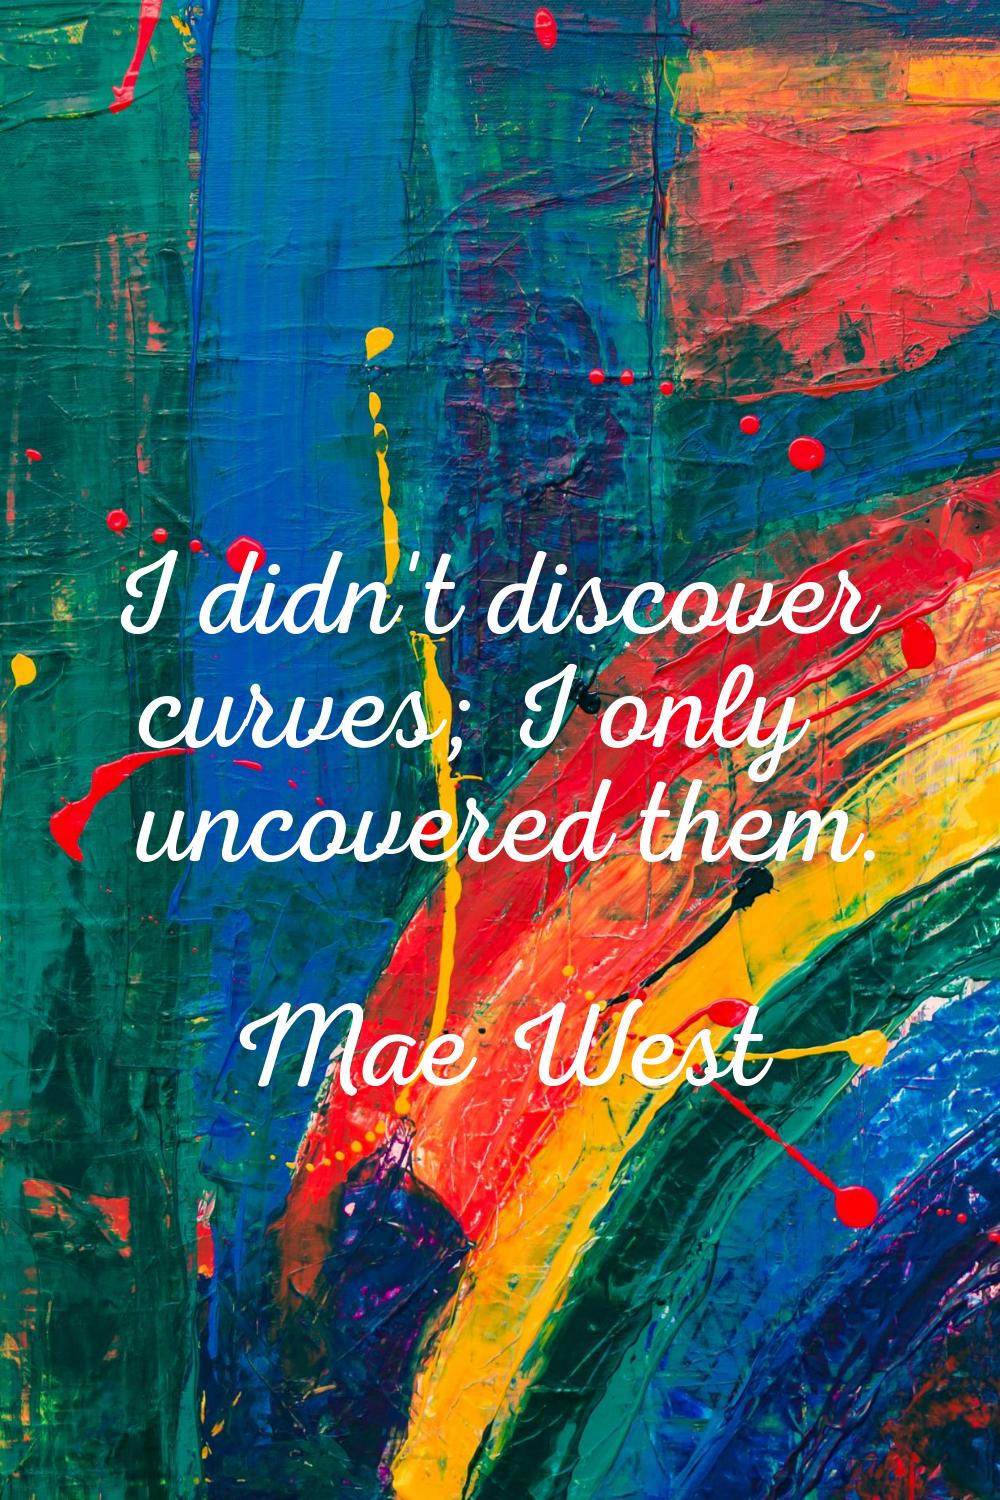 I didn't discover curves; I only uncovered them.